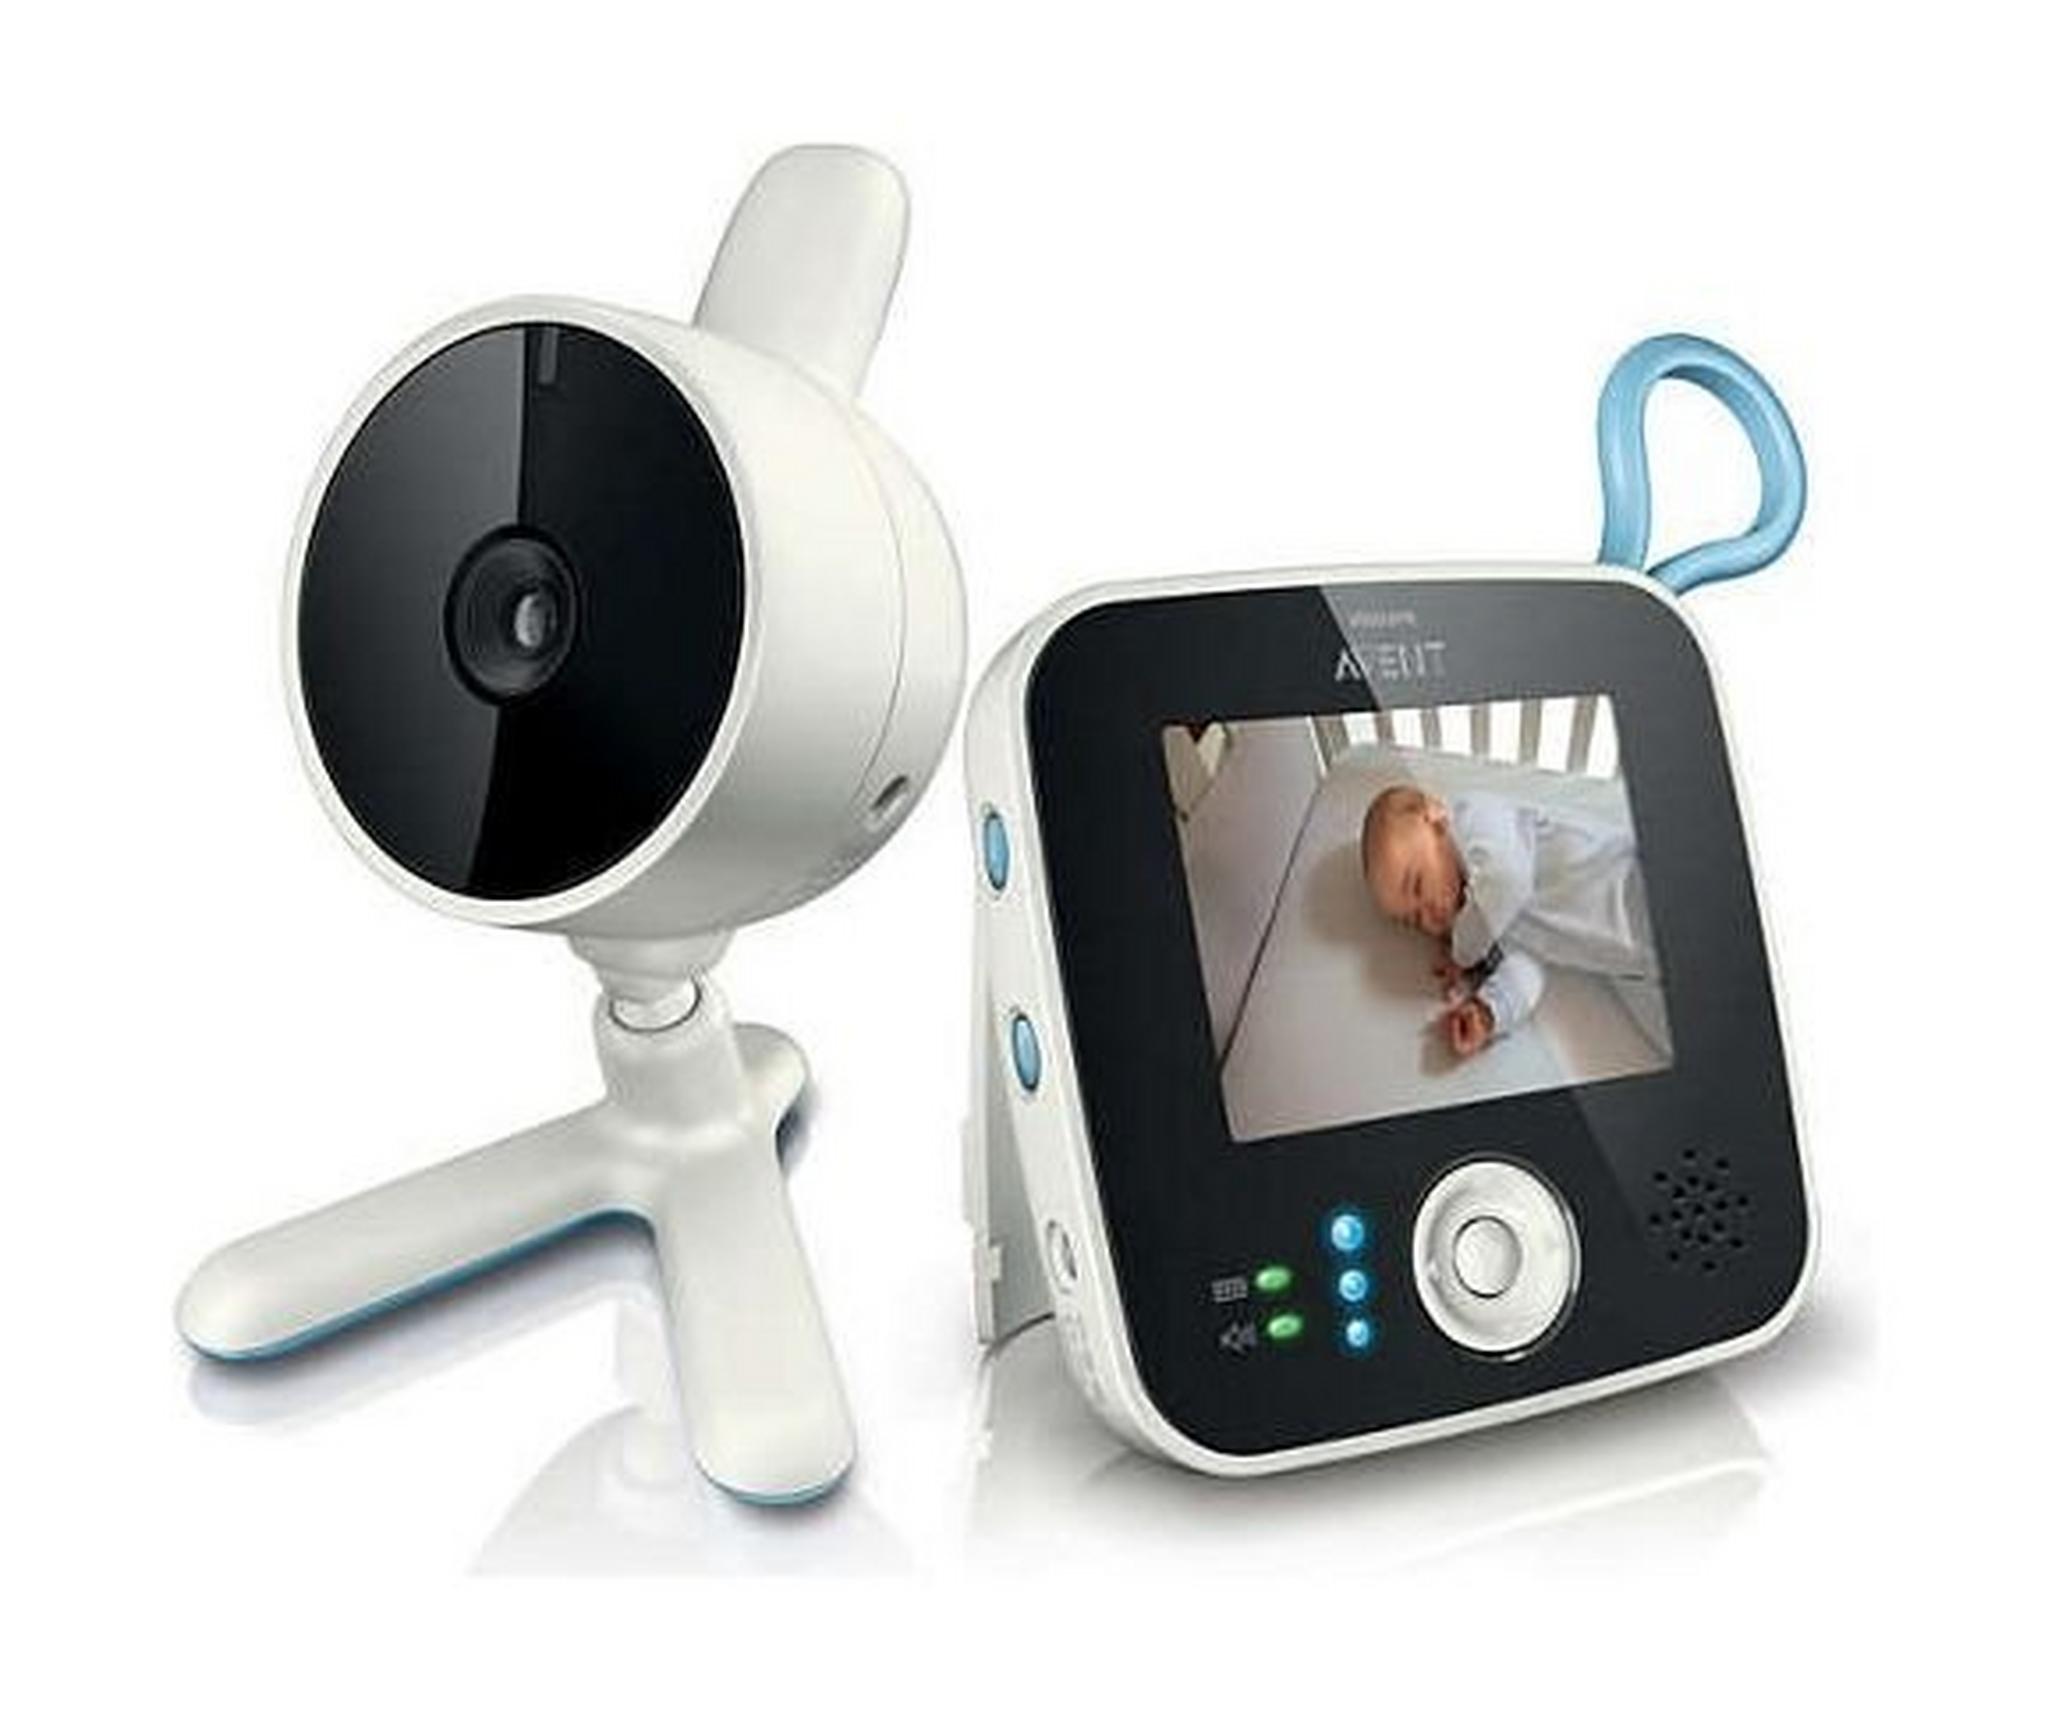 Philips Avent Digital Video Baby Monitor - SCD610/01